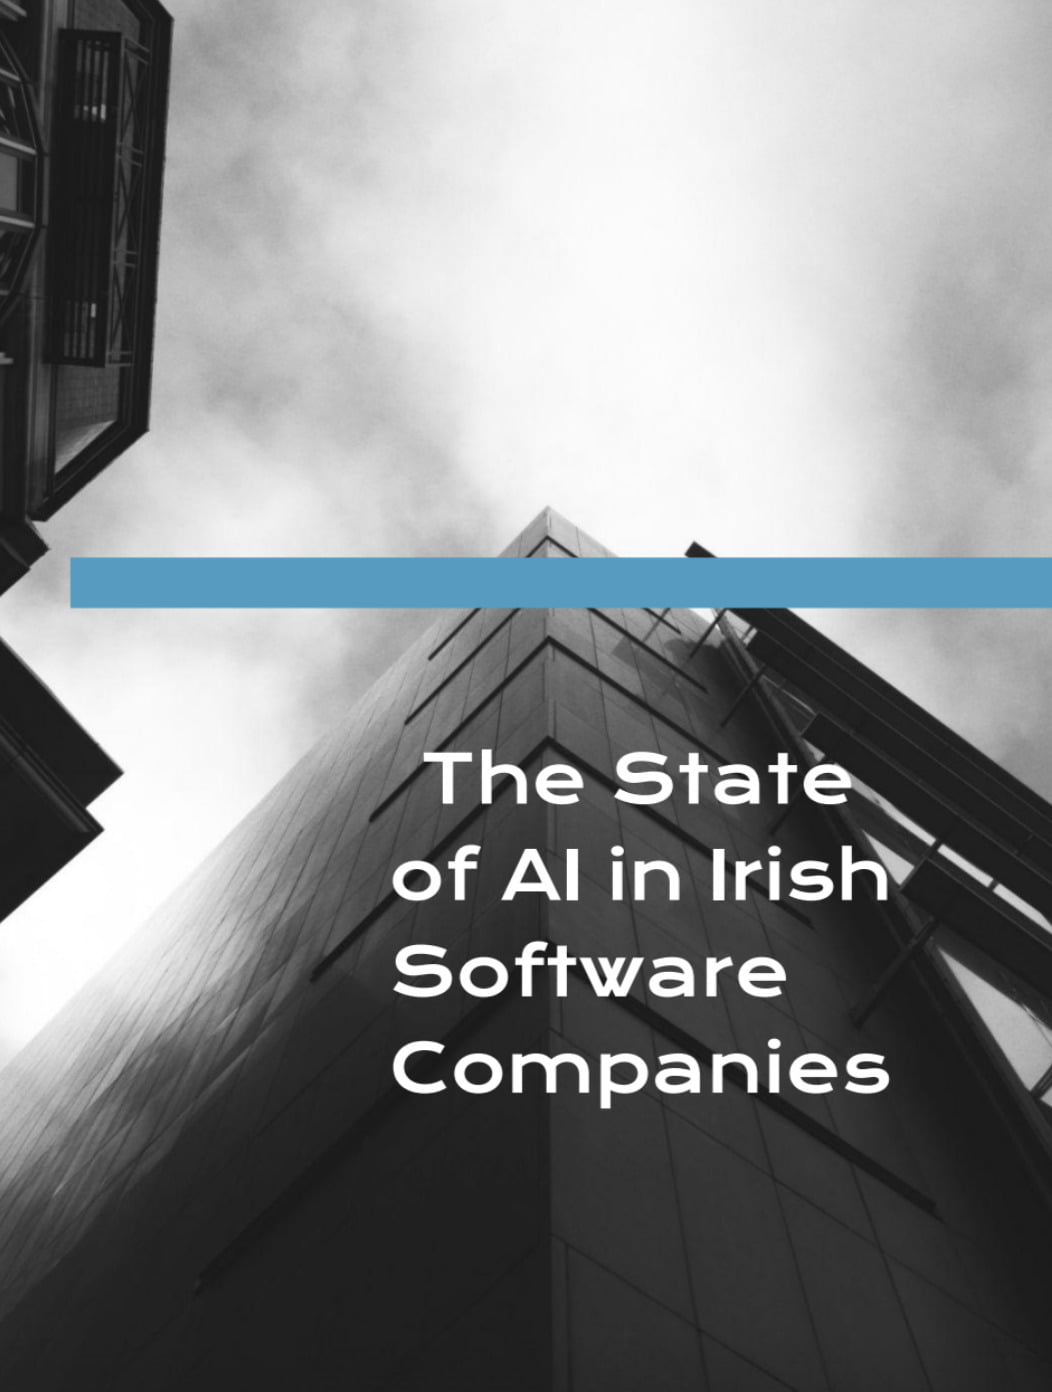 77% of Irish software companies are missing out on the growth potential afforded by AI